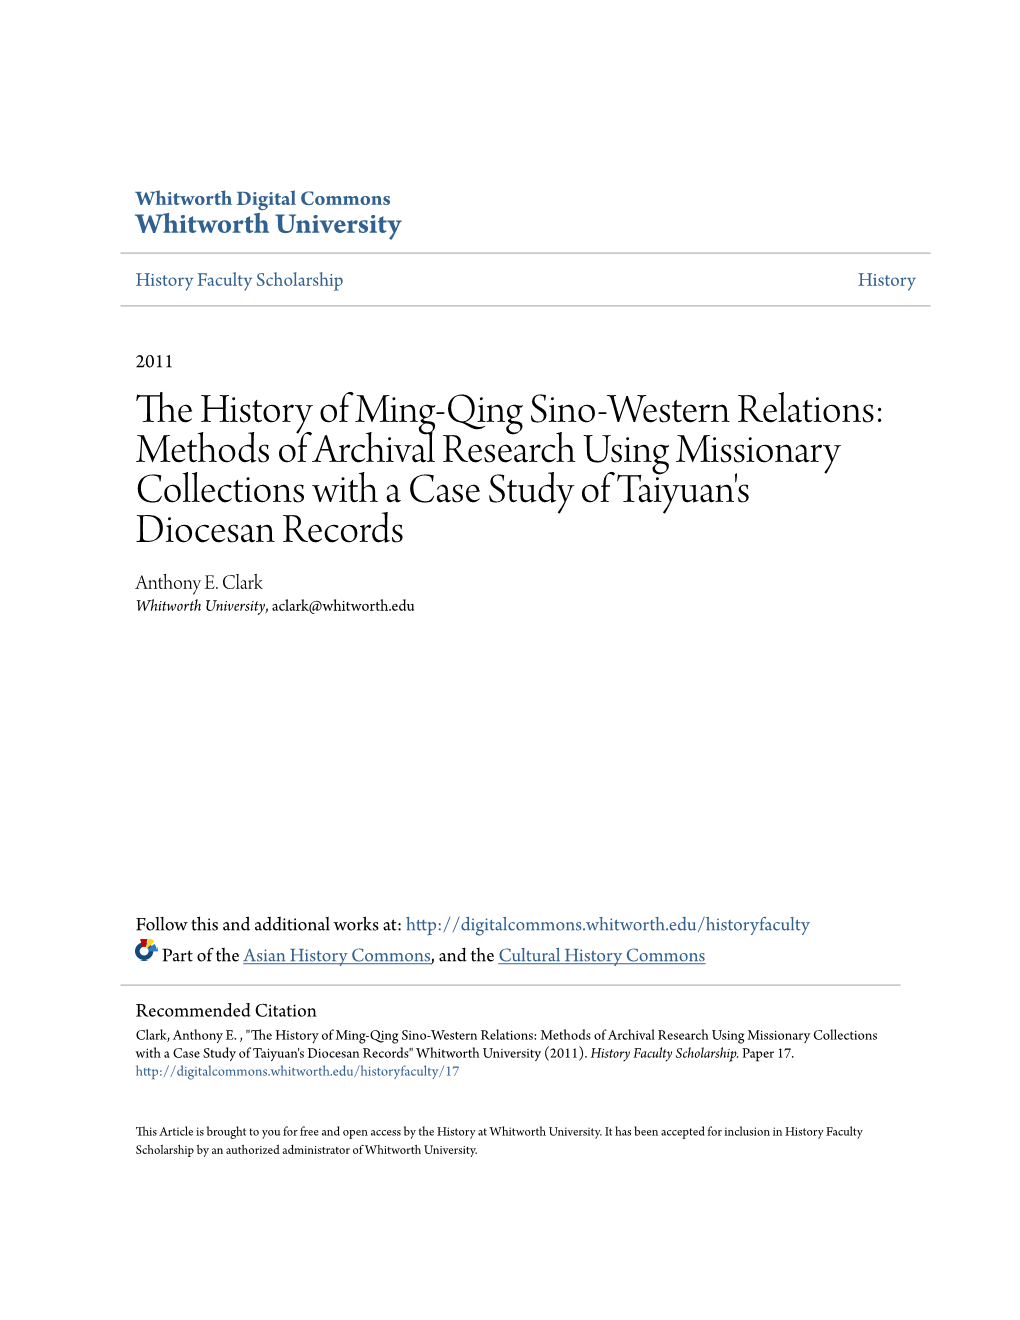 The History of Ming-Qing Sino-Western Relations: Methods Of